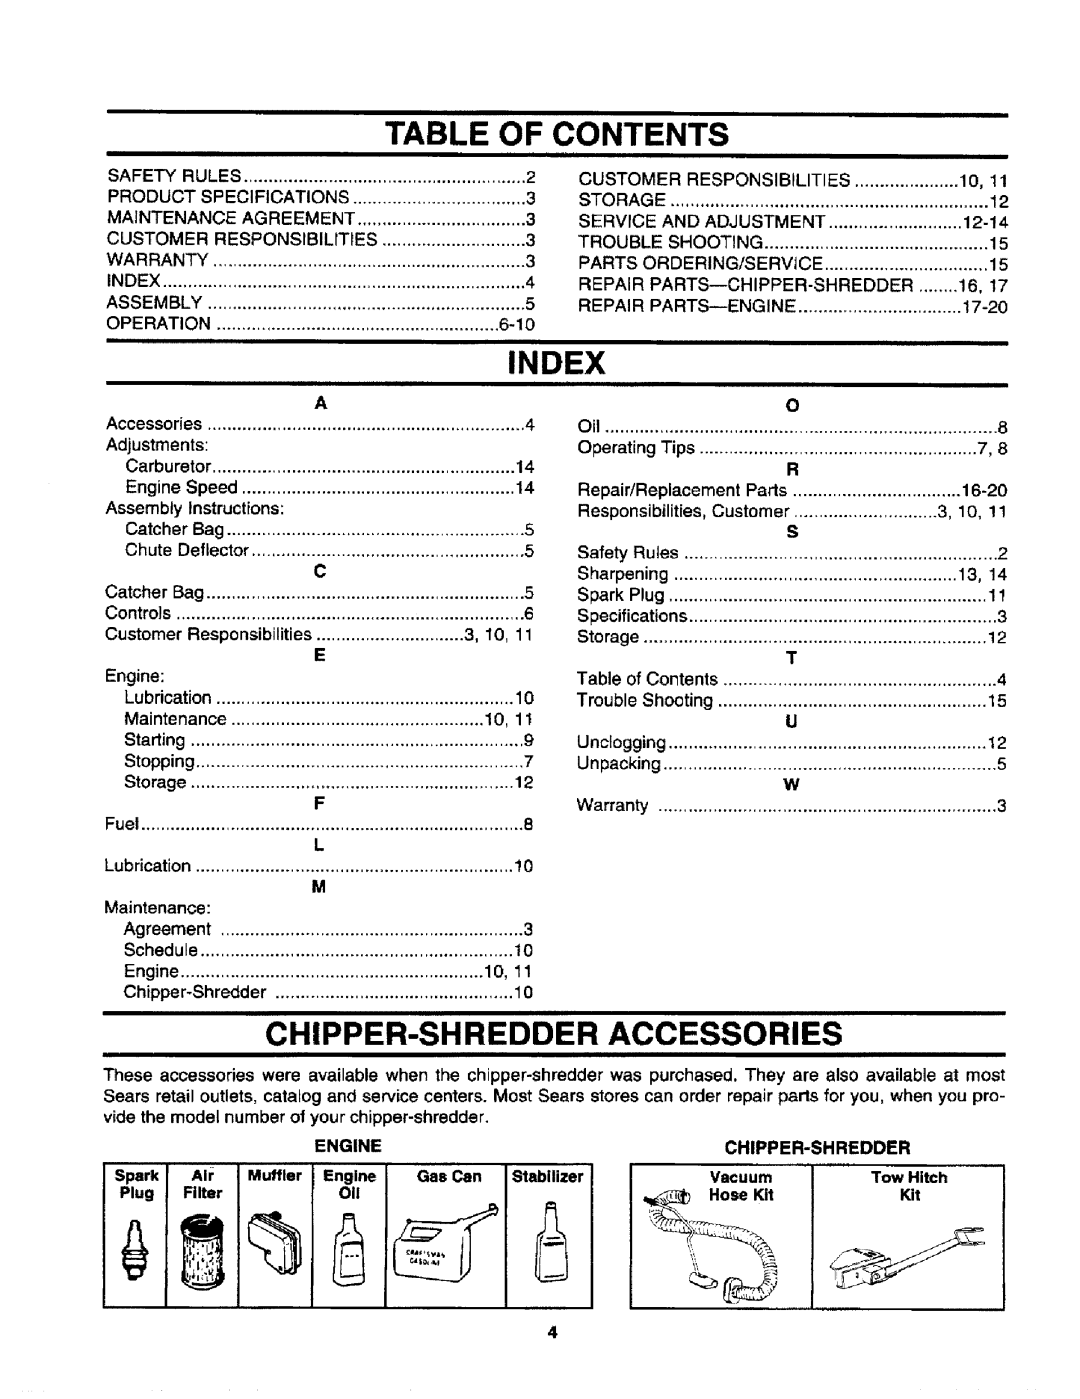 Craftsman 247.795940 manual Table Of Contents, Index, Chipper-Shredderaccessories 